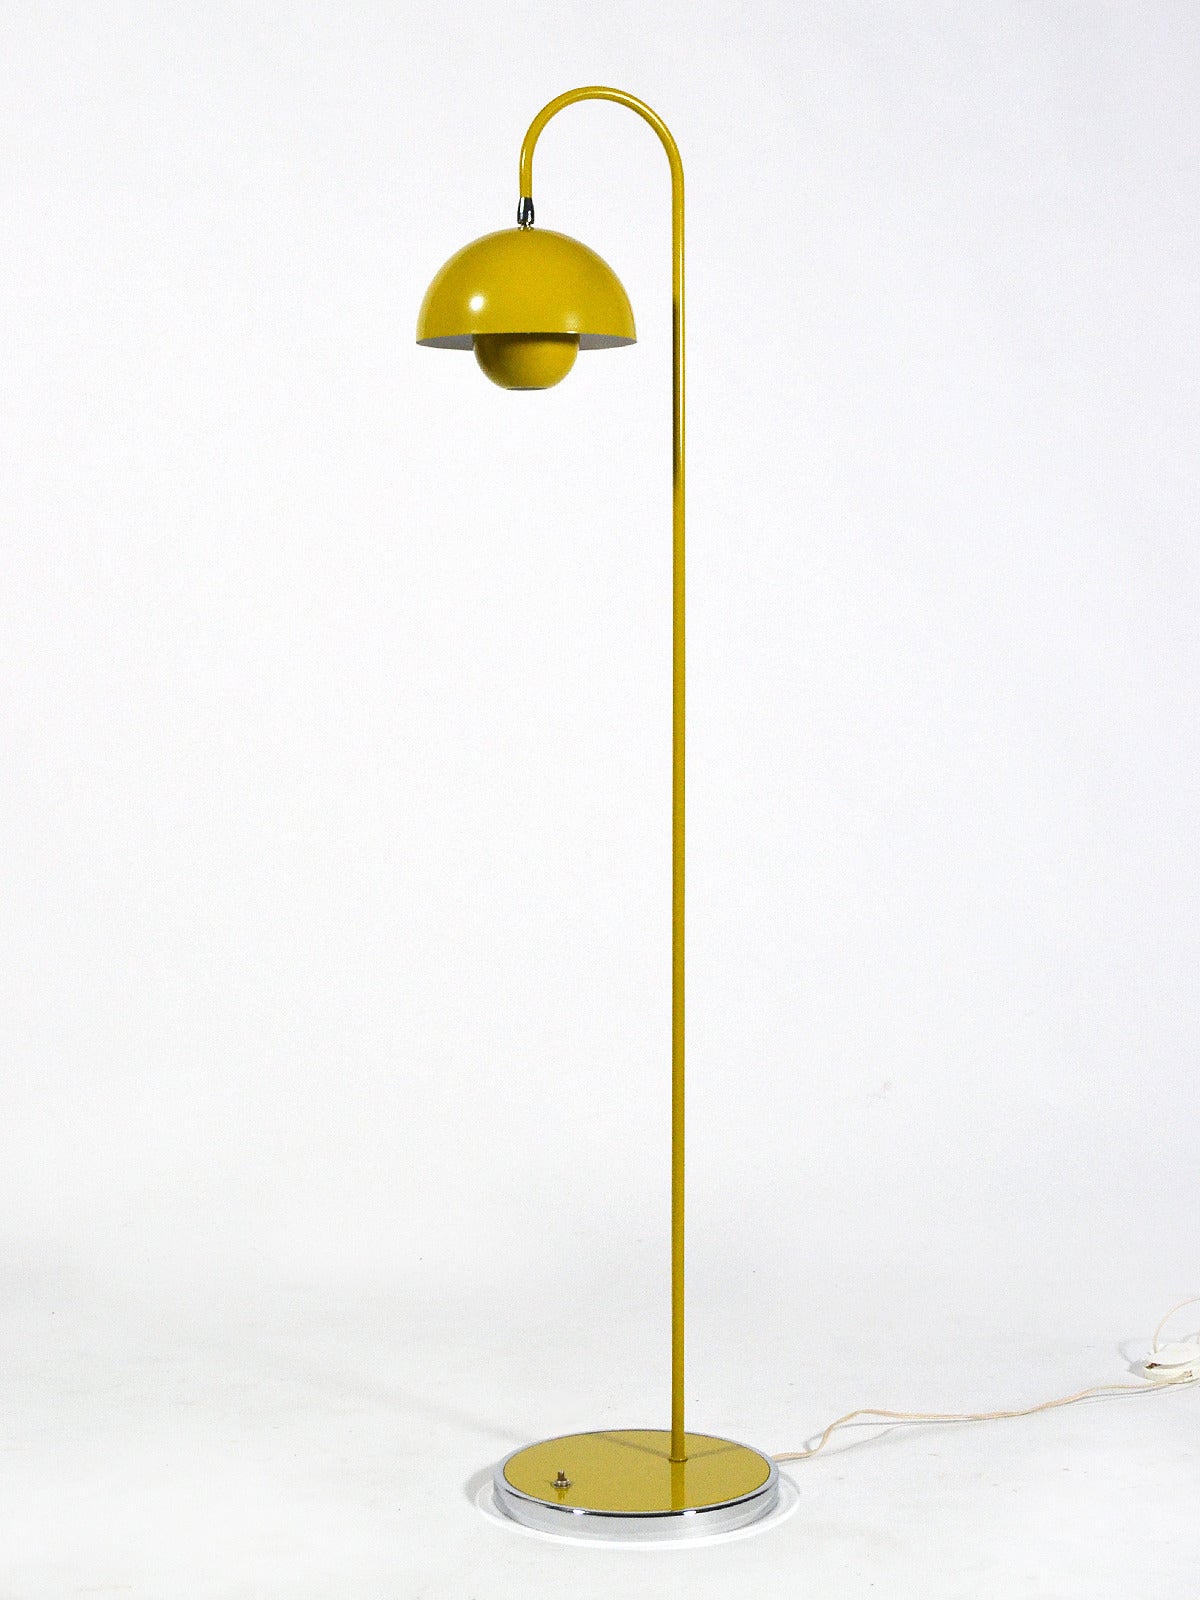 Everything he designed was subject to Panton's playful and innovative aesthetic. Chairs, tables, textiles, and of course lighting. This floor lamp is from a series of 